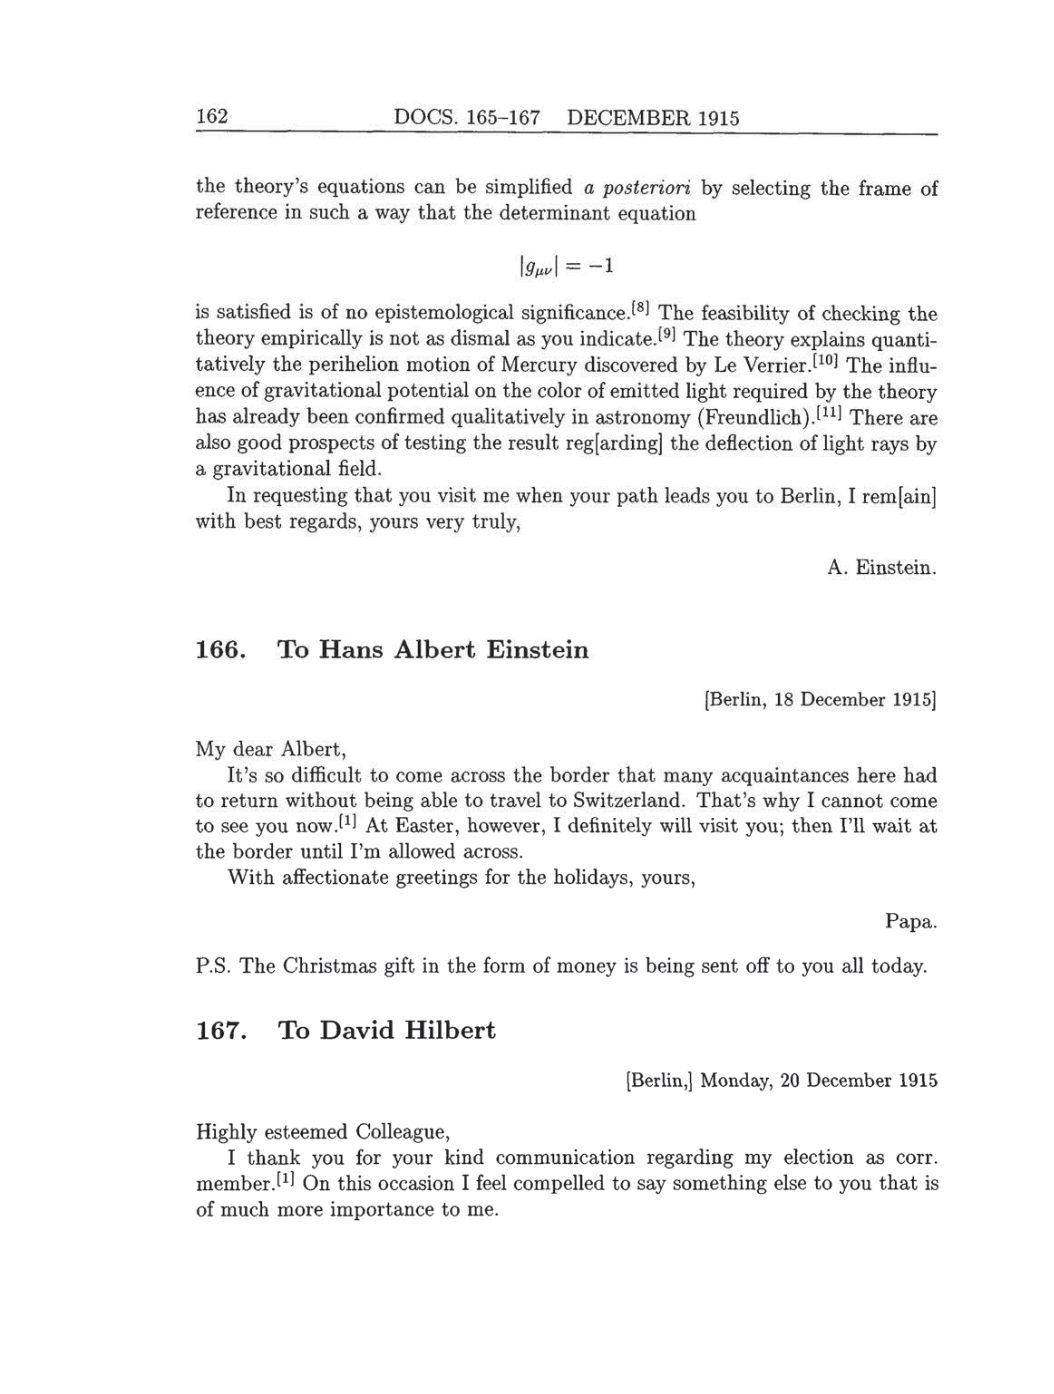 Volume 8: The Berlin Years: Correspondence, 1914-1918 (English translation supplement) page 162